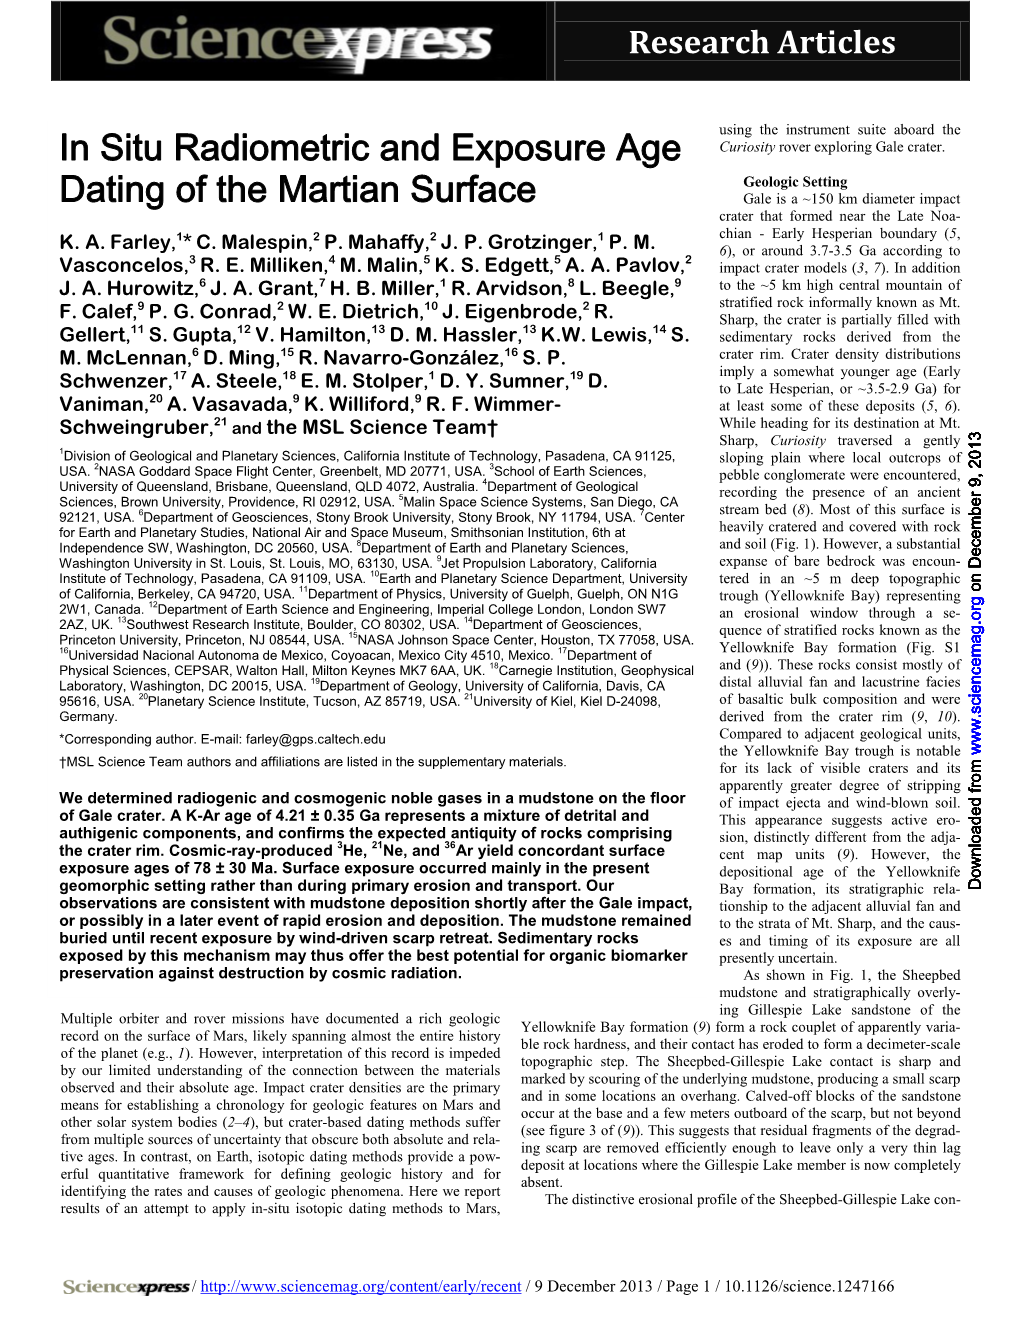 In Situ Radiometric and Exposure Age Dating of The